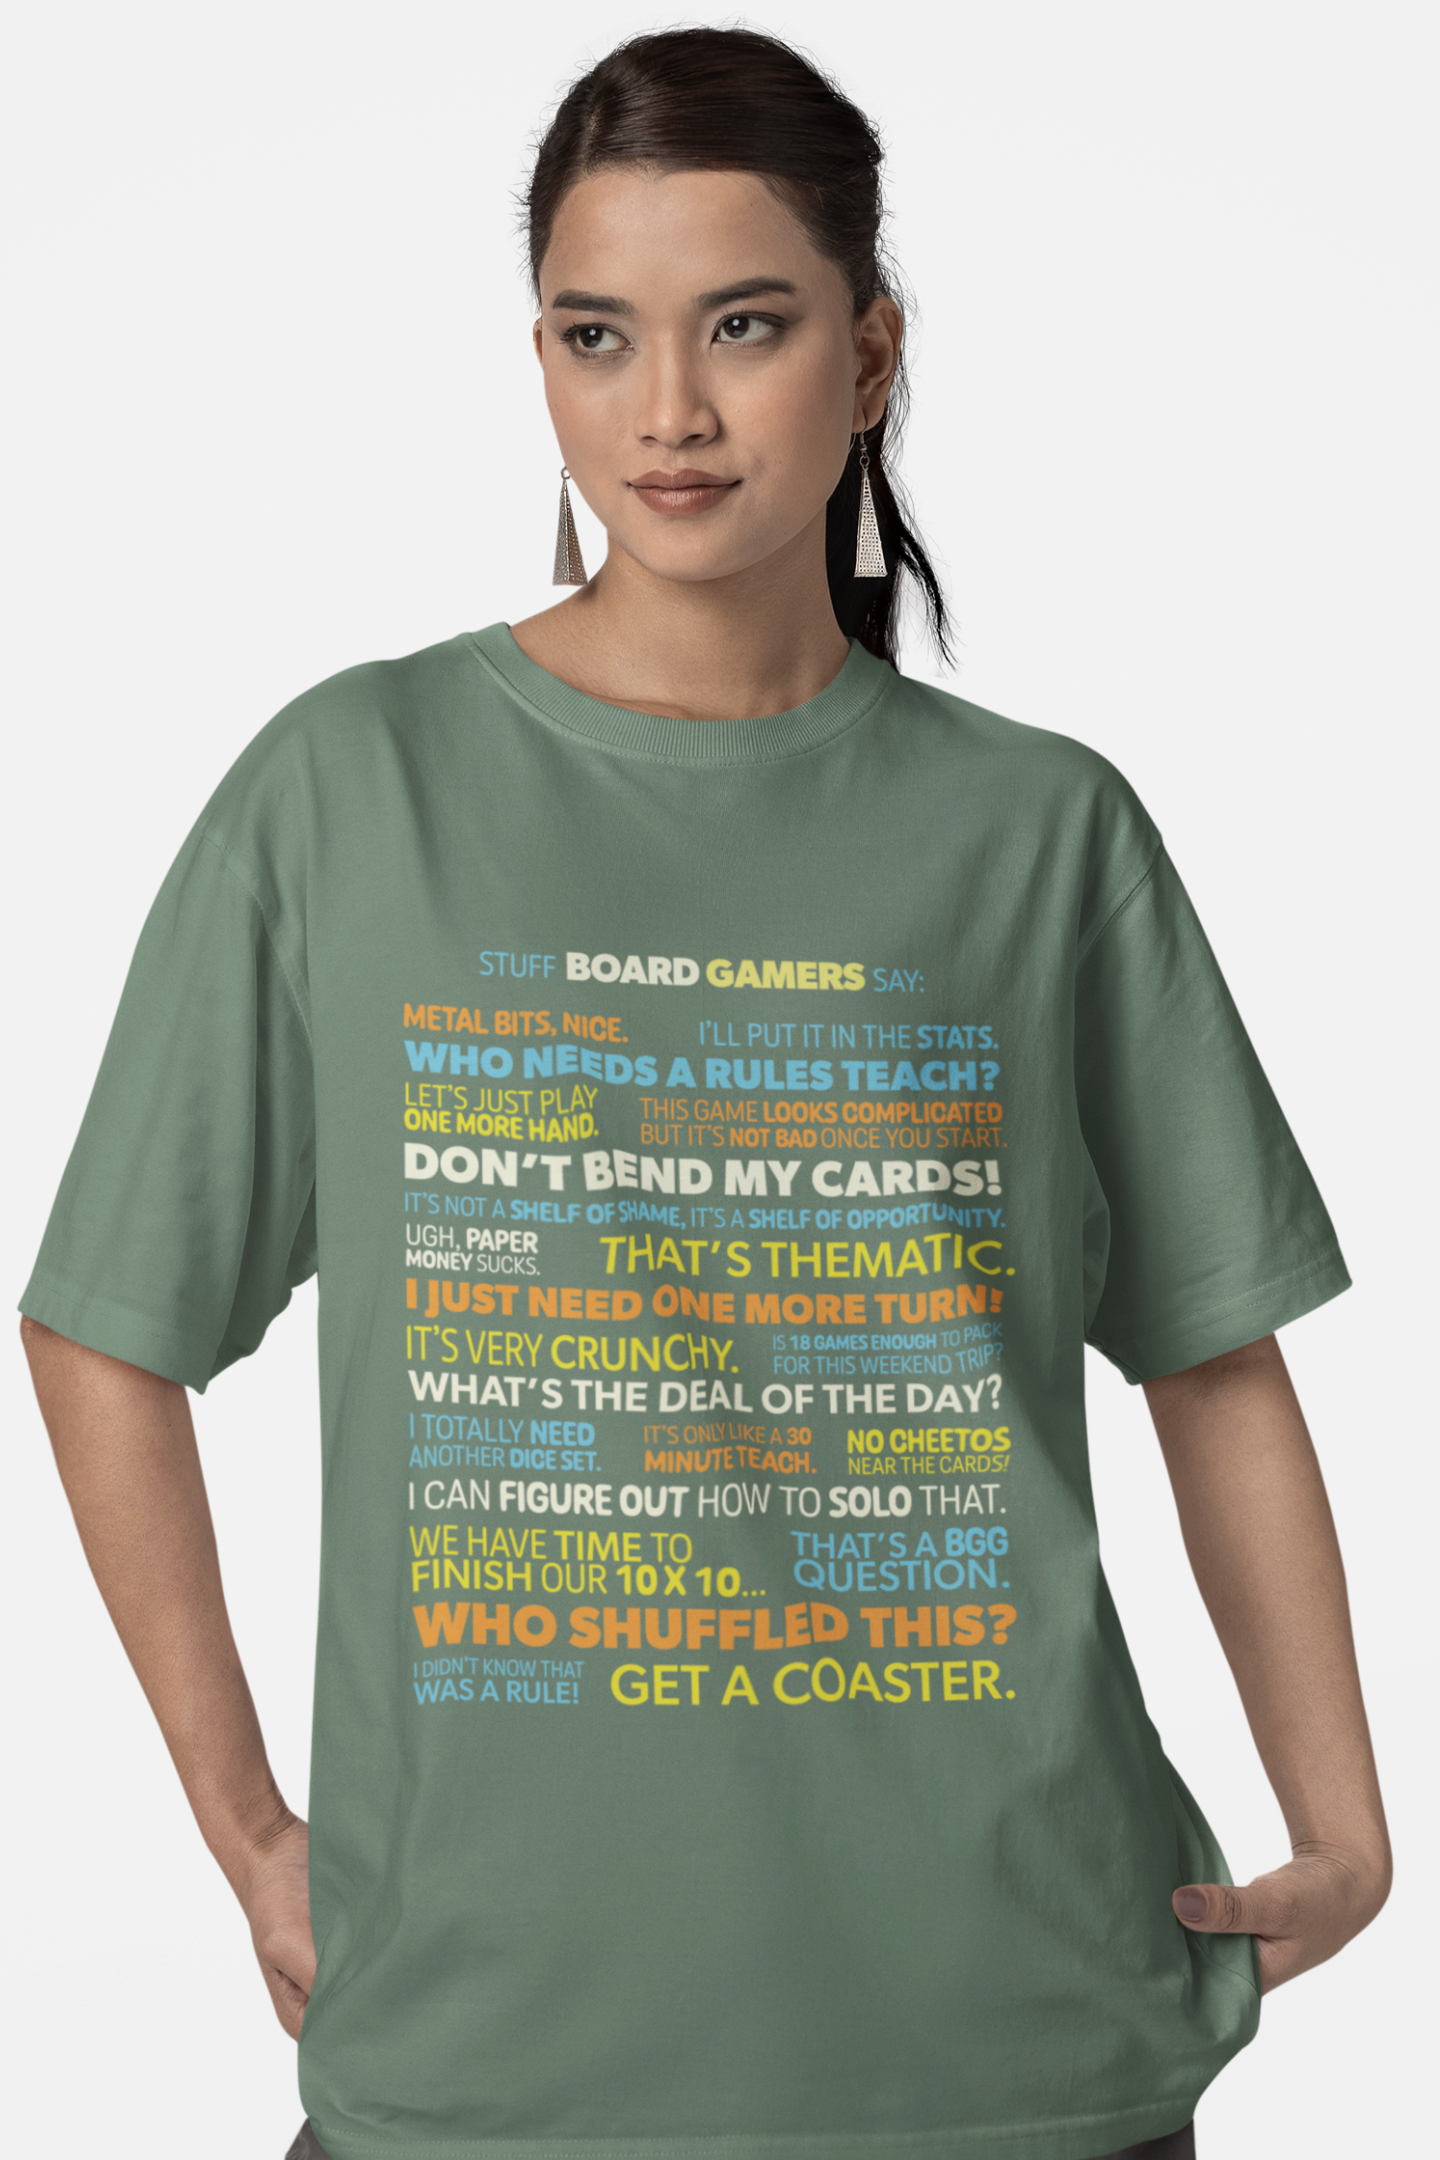 Stuff Board Gamers Say T Shirt | Funny Board Gamers Quotes T Shirt | Perfect Gift for Board Game Lovers